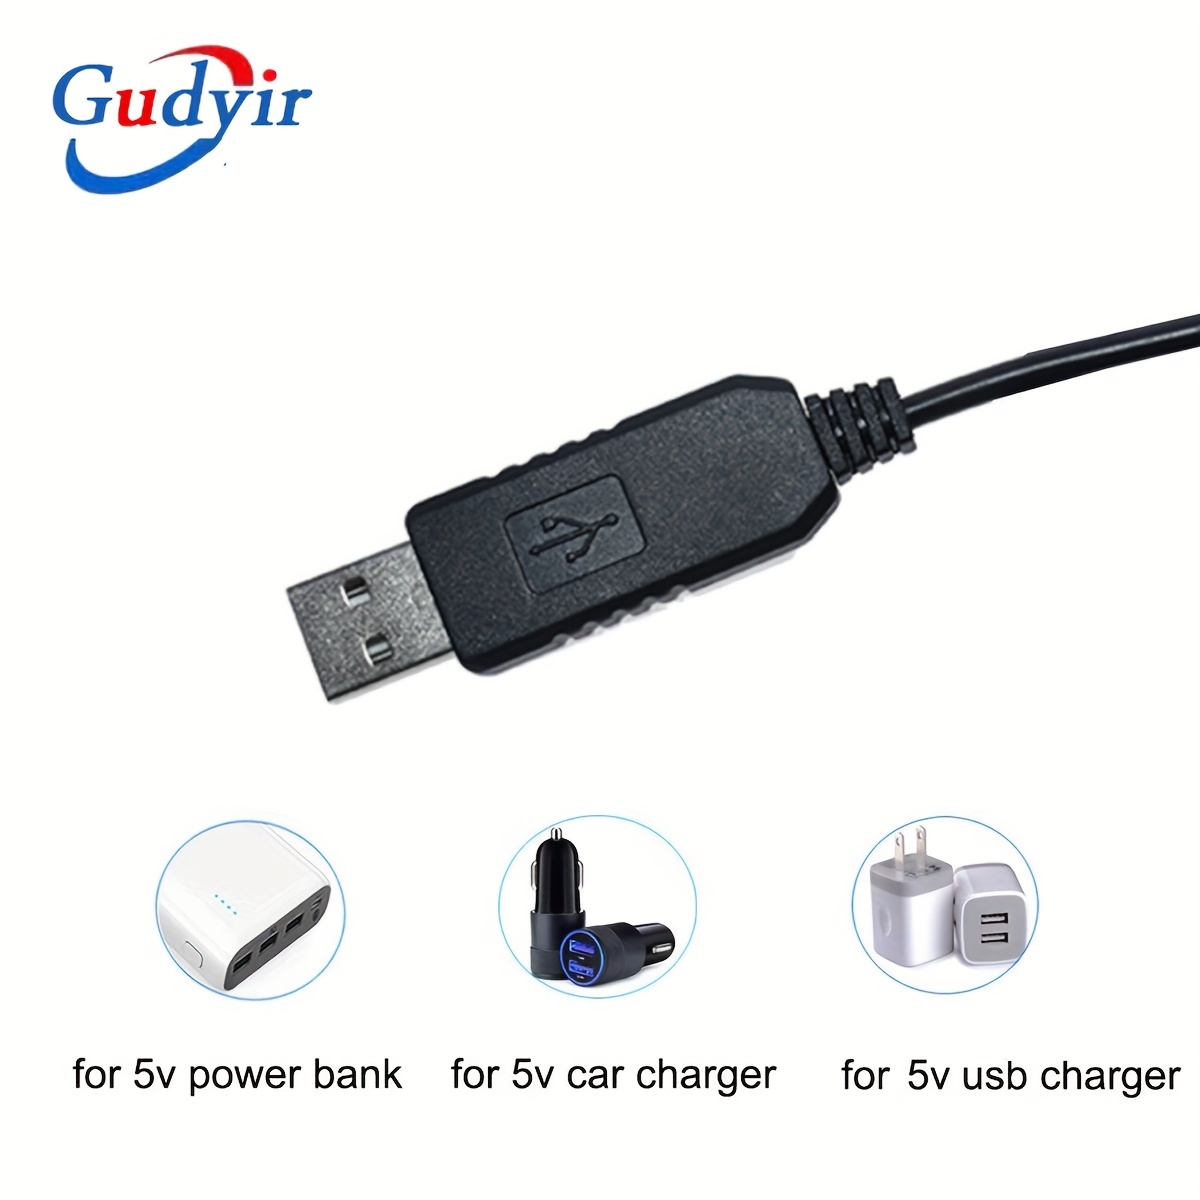 Usb Convert Cable 5v 5v 9v 12v Voltage Step Cable 5 5x2 1mm Connect Male 1m, Quick & Secure Online Checkout